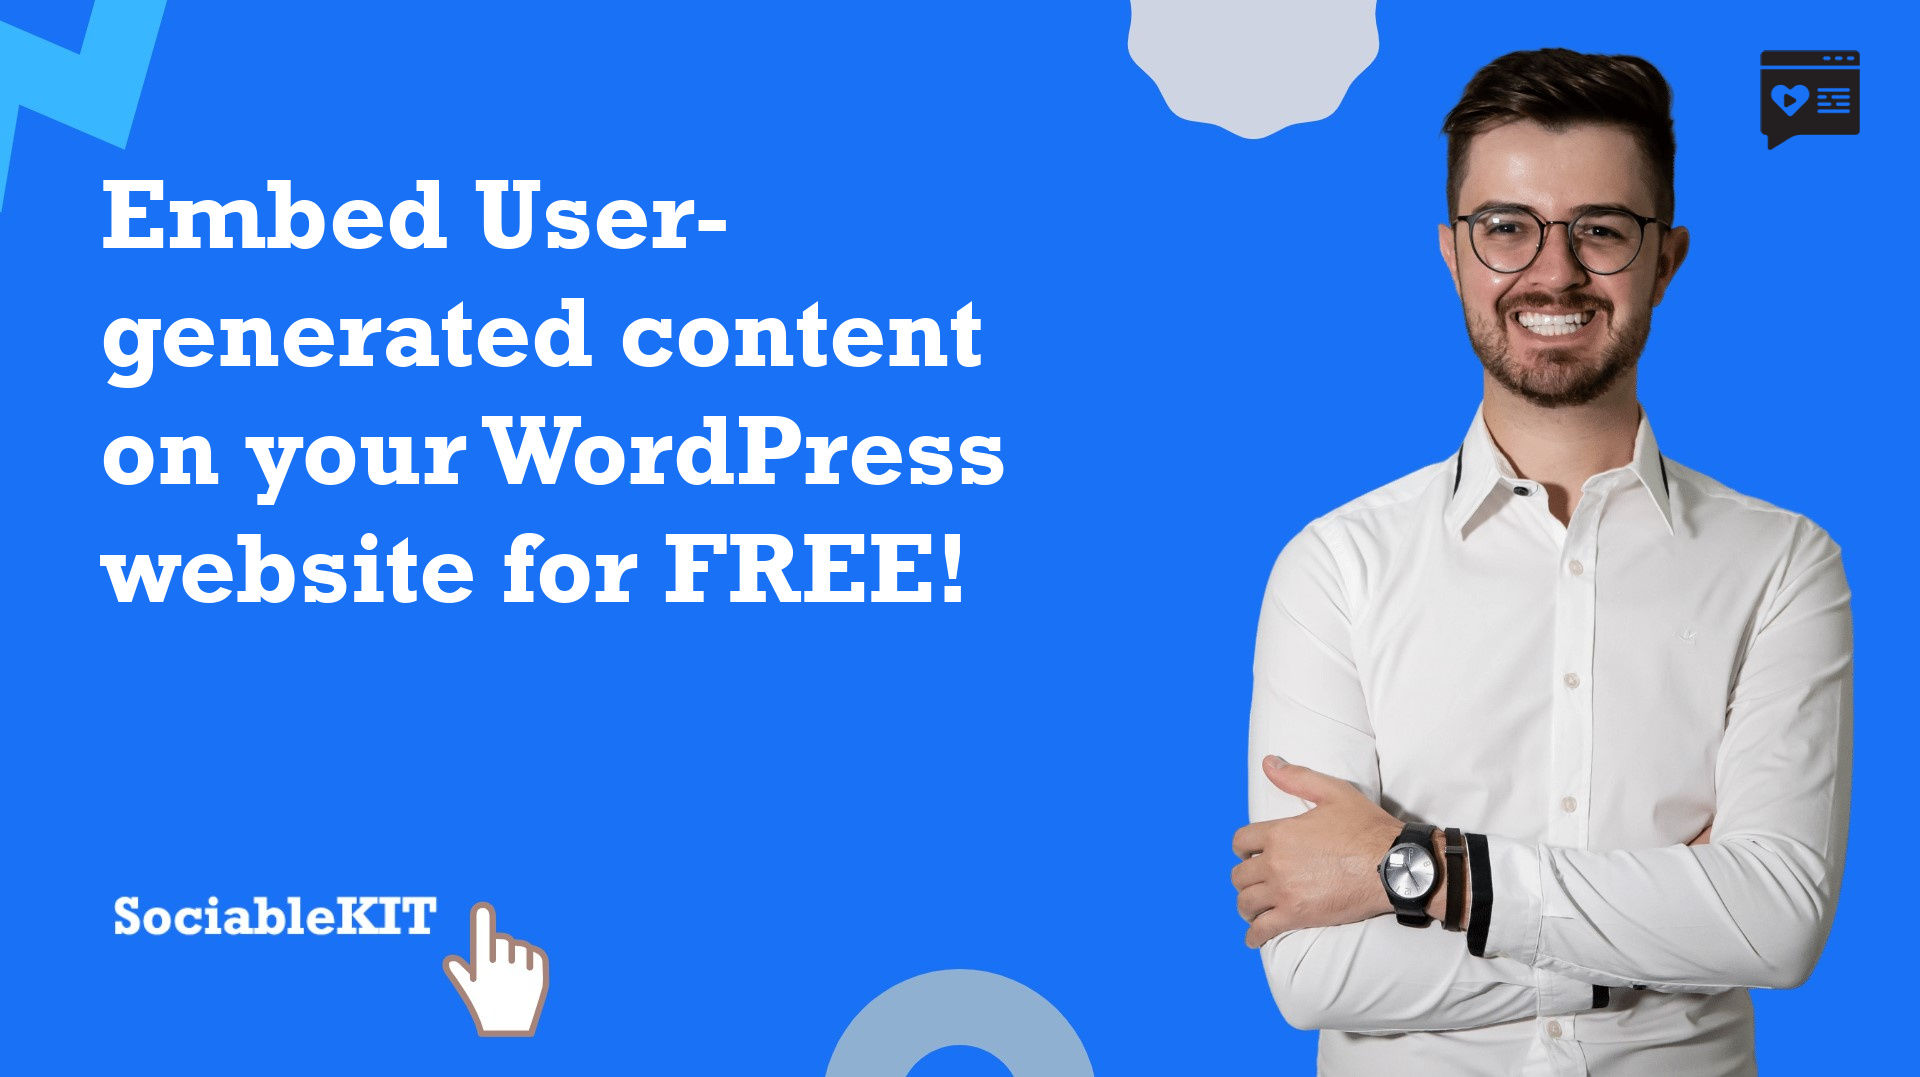 How to embed User-generated content on your WordPress website for FREE?